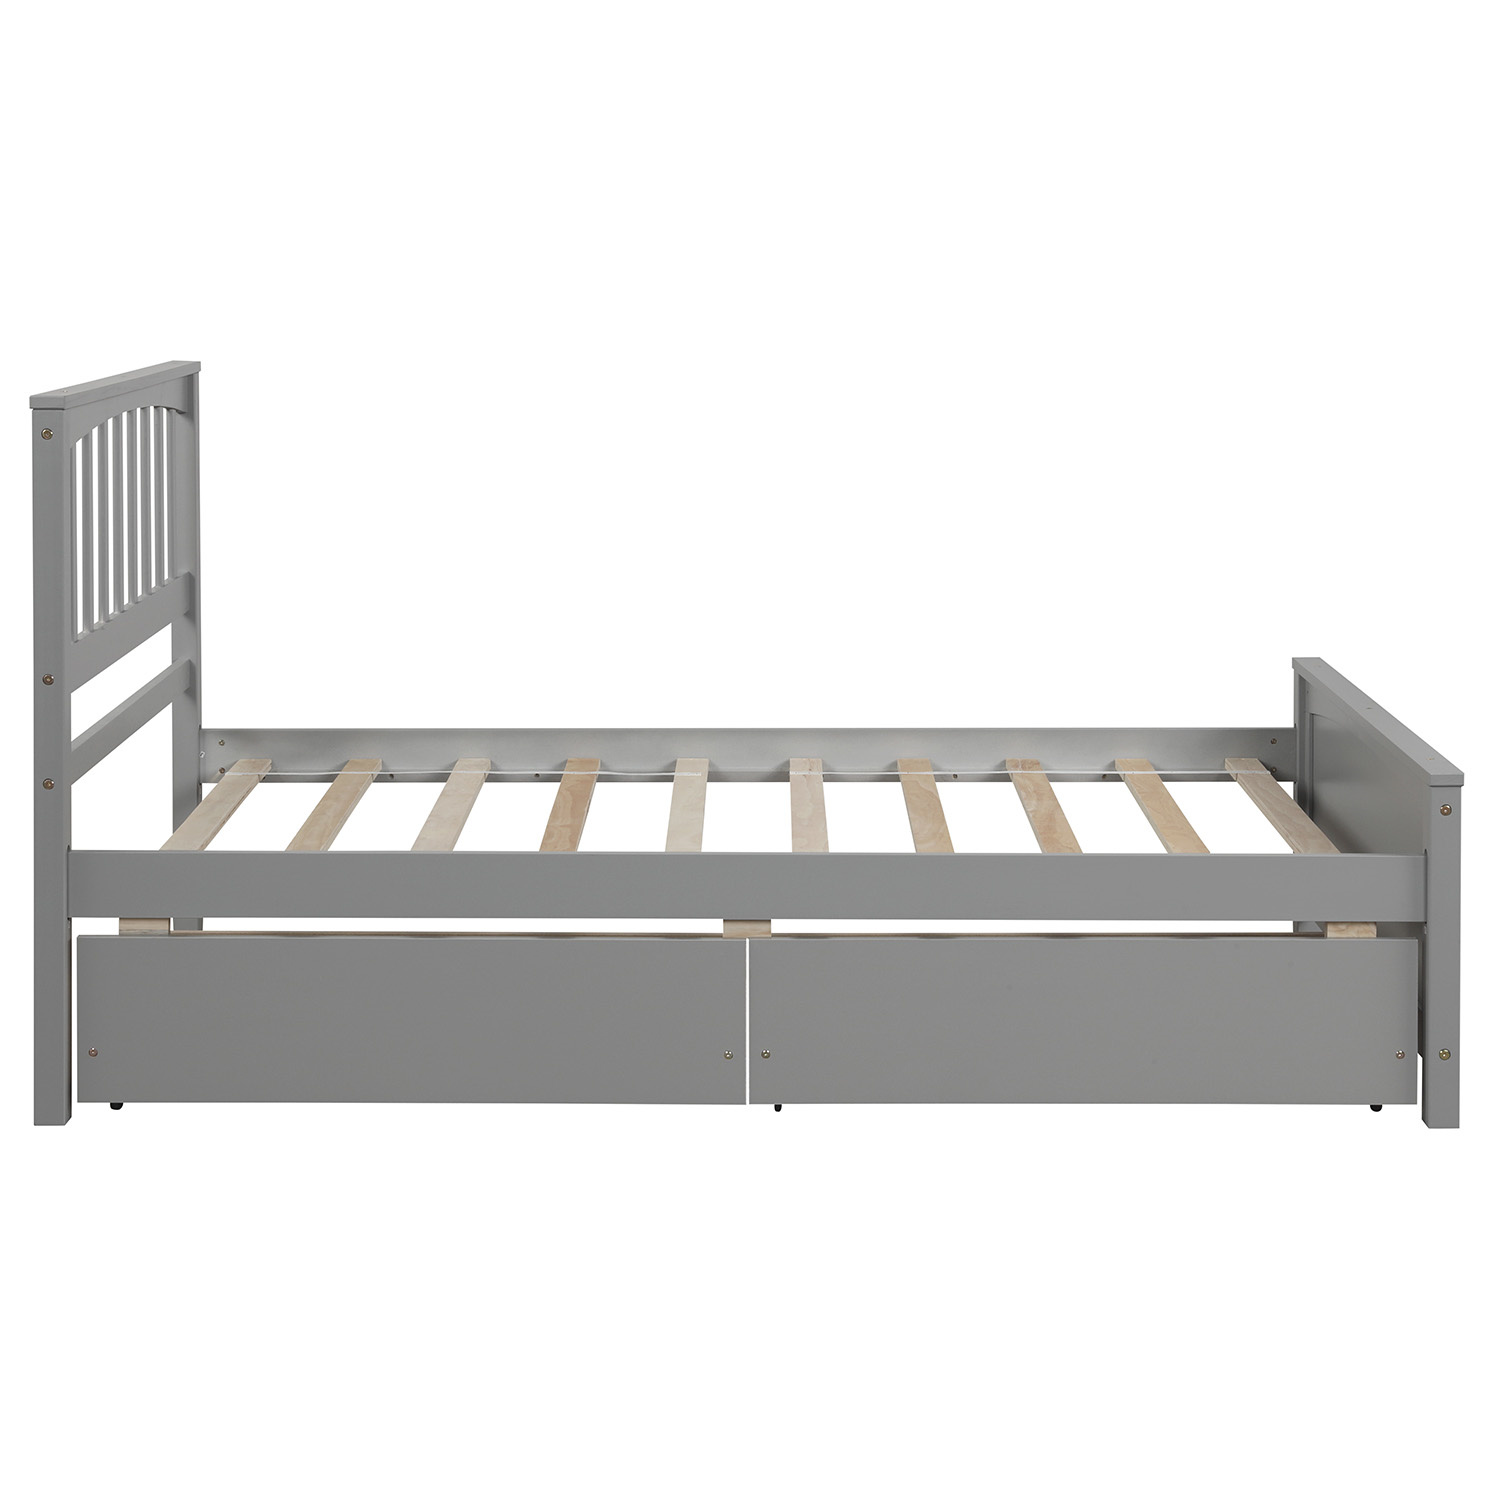 Twin Size Platform Bed with 2 Drawers, Classic Solid Wood Bed Frame with Headboard and Under-Bed Storage Space, for Kids Teens Adults Bedroom Furniture, No Box Spring Need, Grey - image 4 of 6